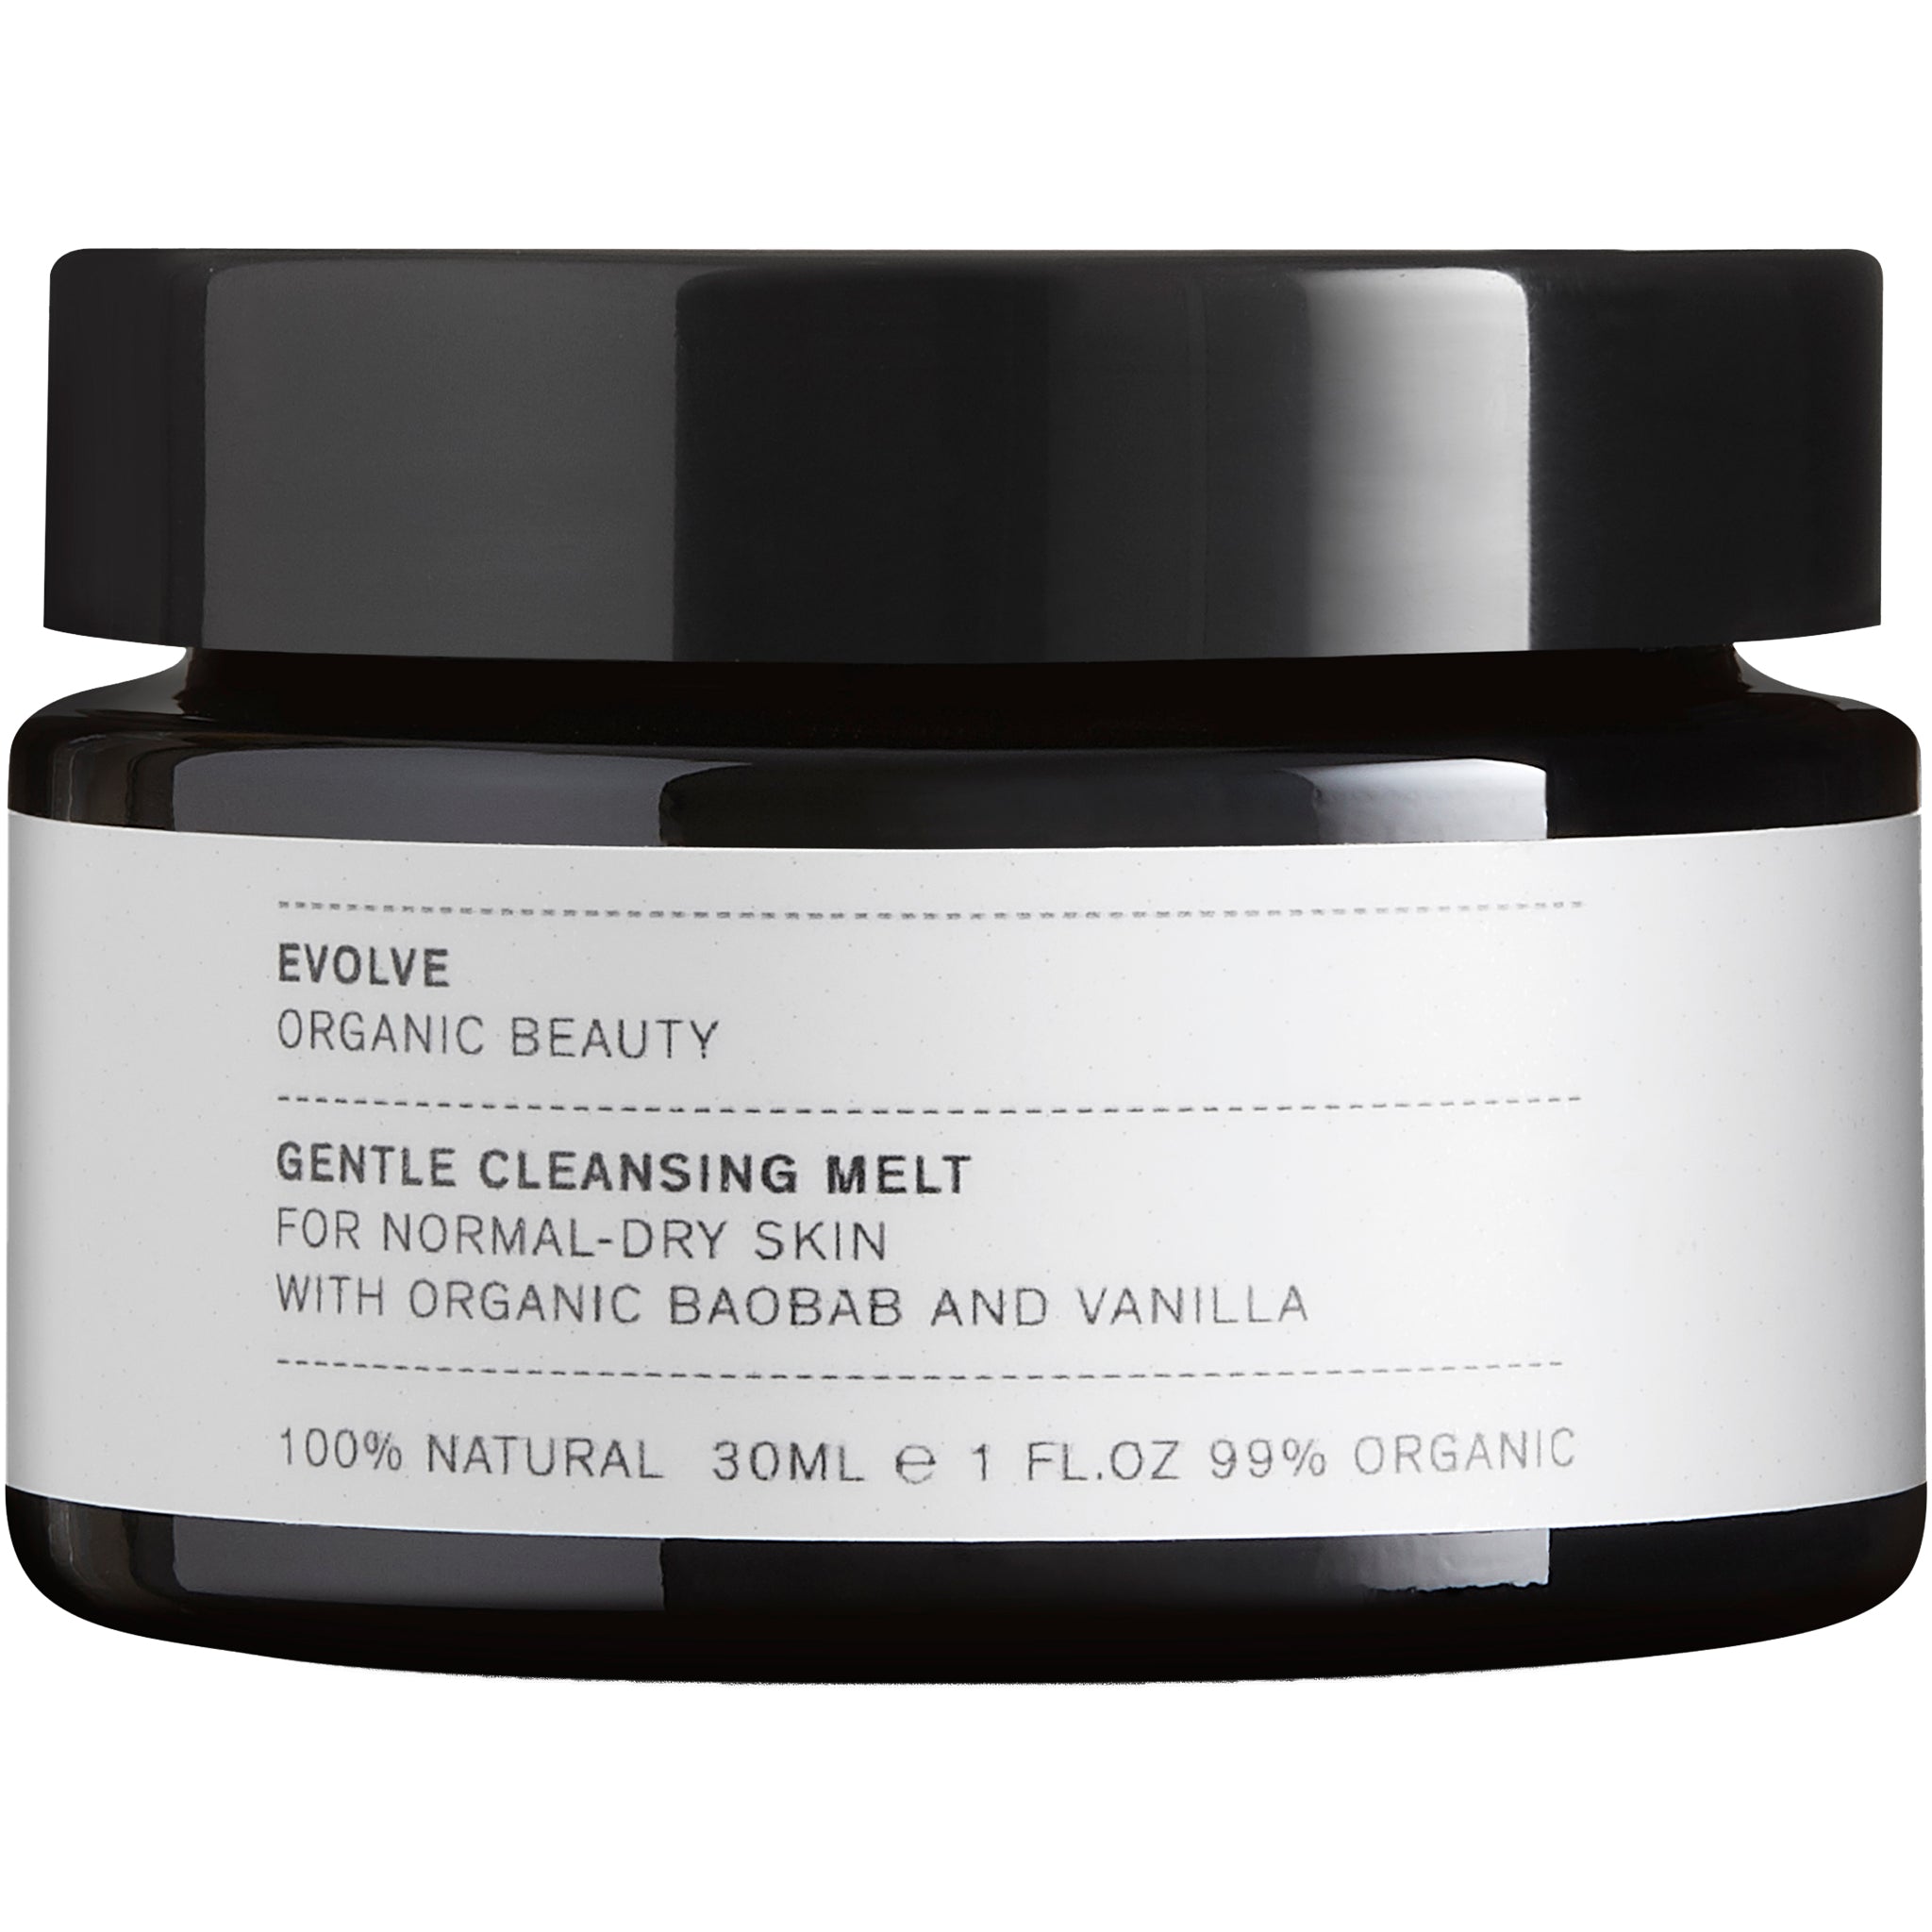 Gentle Cleansing Melt - mypure.co.uk